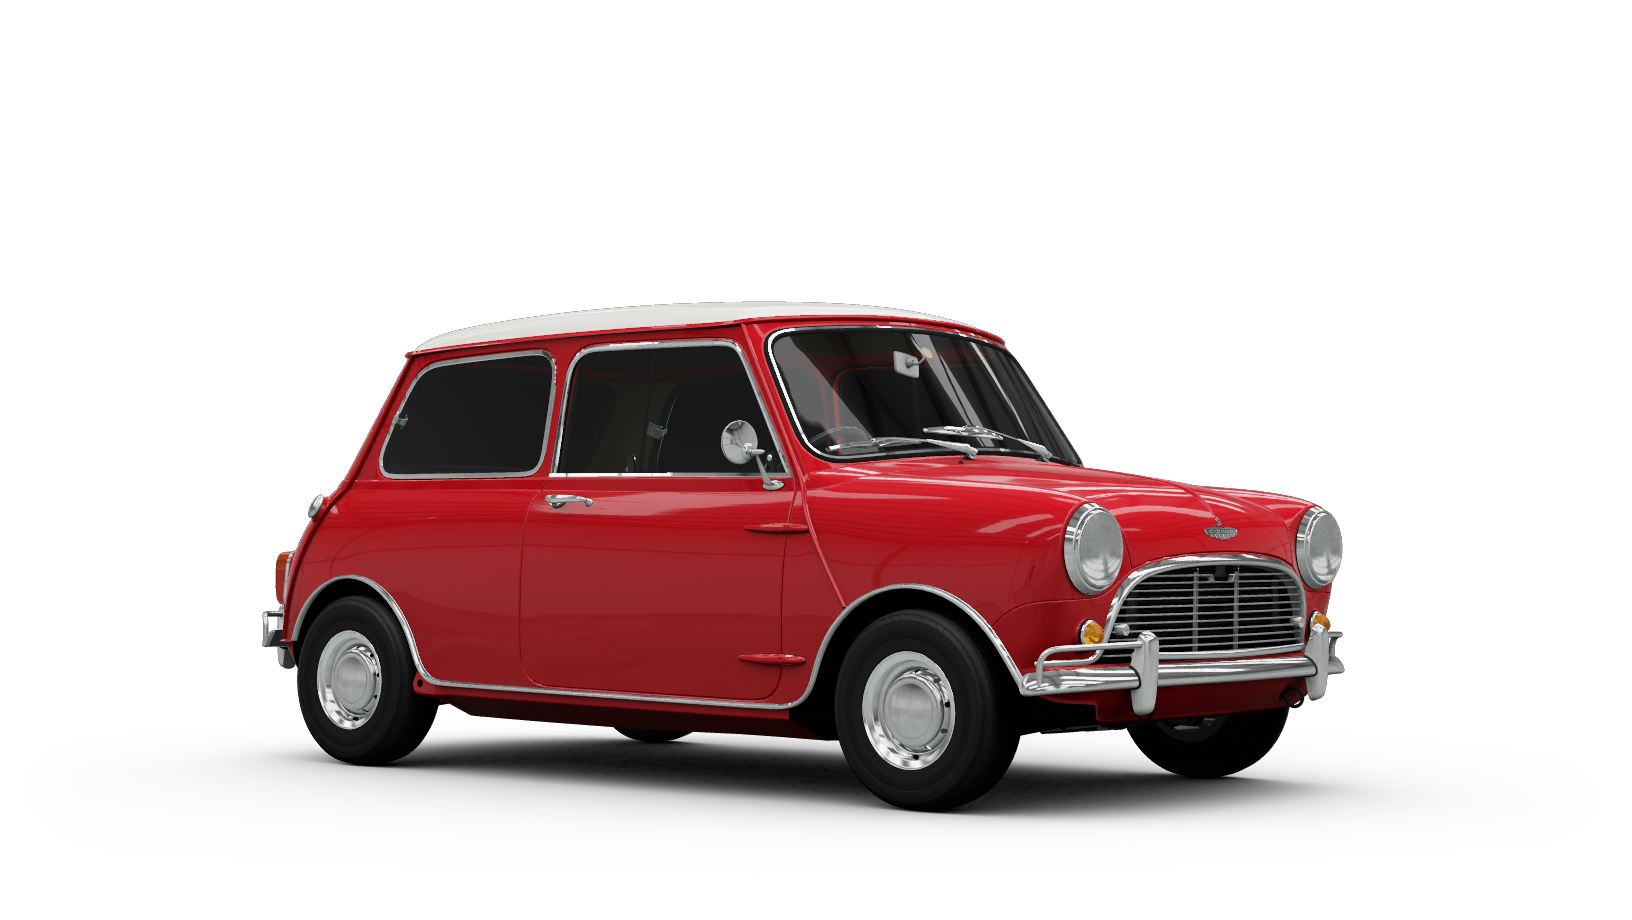 https://static.wikia.nocookie.net/forzamotorsport/images/b/be/HOR_XB1_MINI_Cooper.png/revision/latest?cb=20191102130530